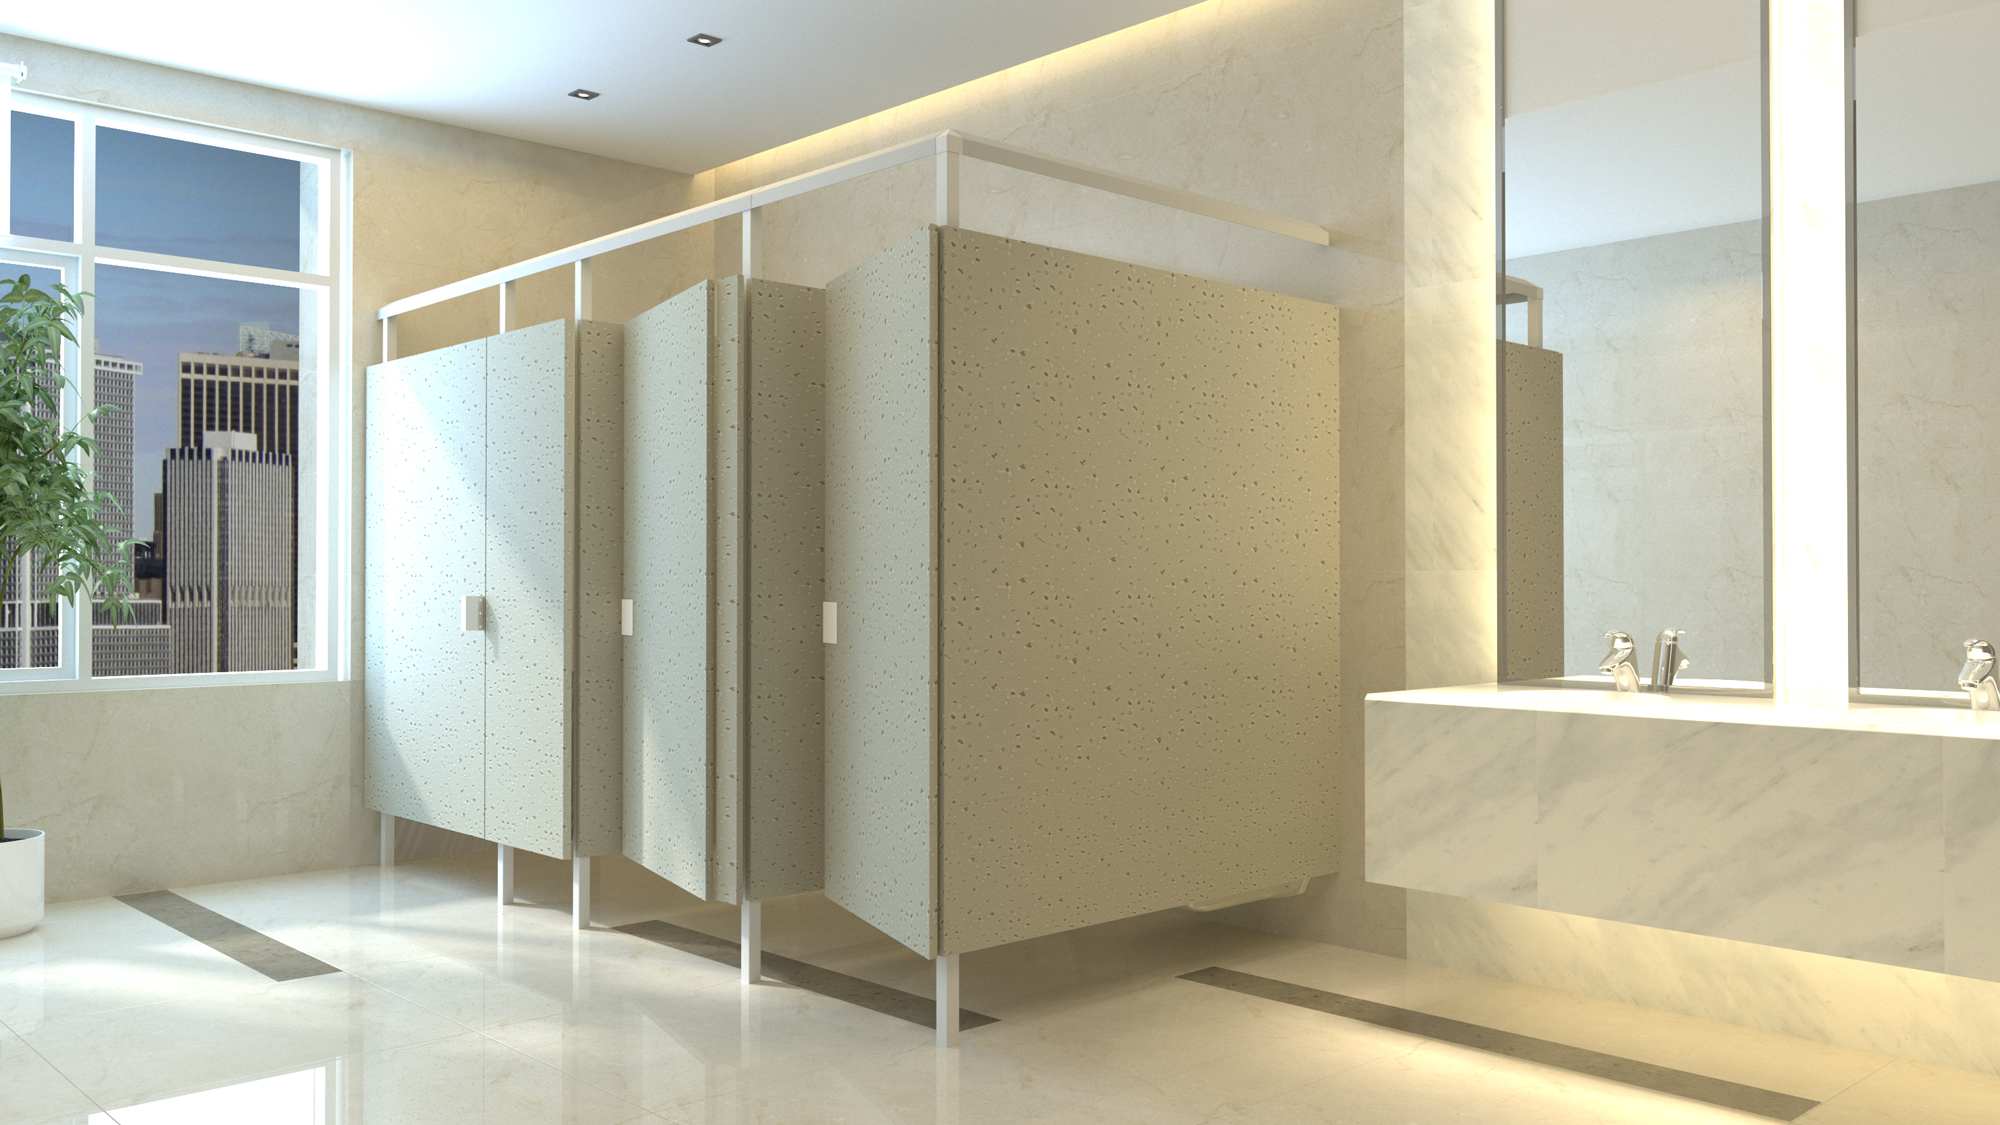 Three toilet room stalls showing Eclipse Partitions in Gravel finish.